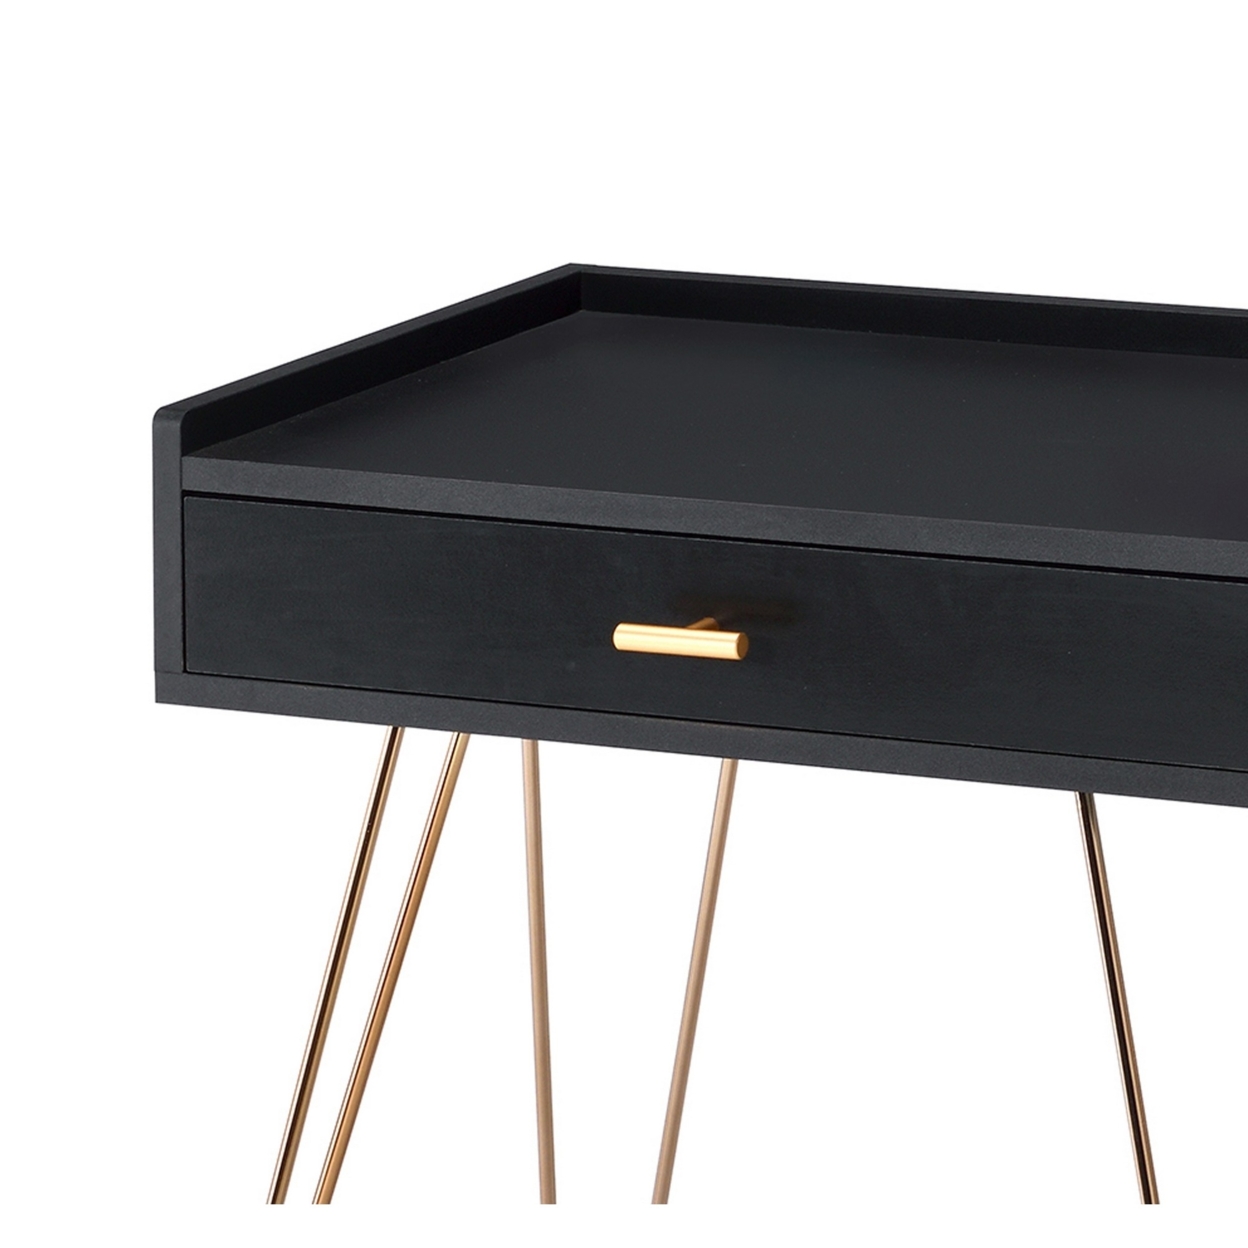 23.5 Inches 1 Drawer End Table With Hairpin Legs, Black And Copper- Saltoro Sherpi